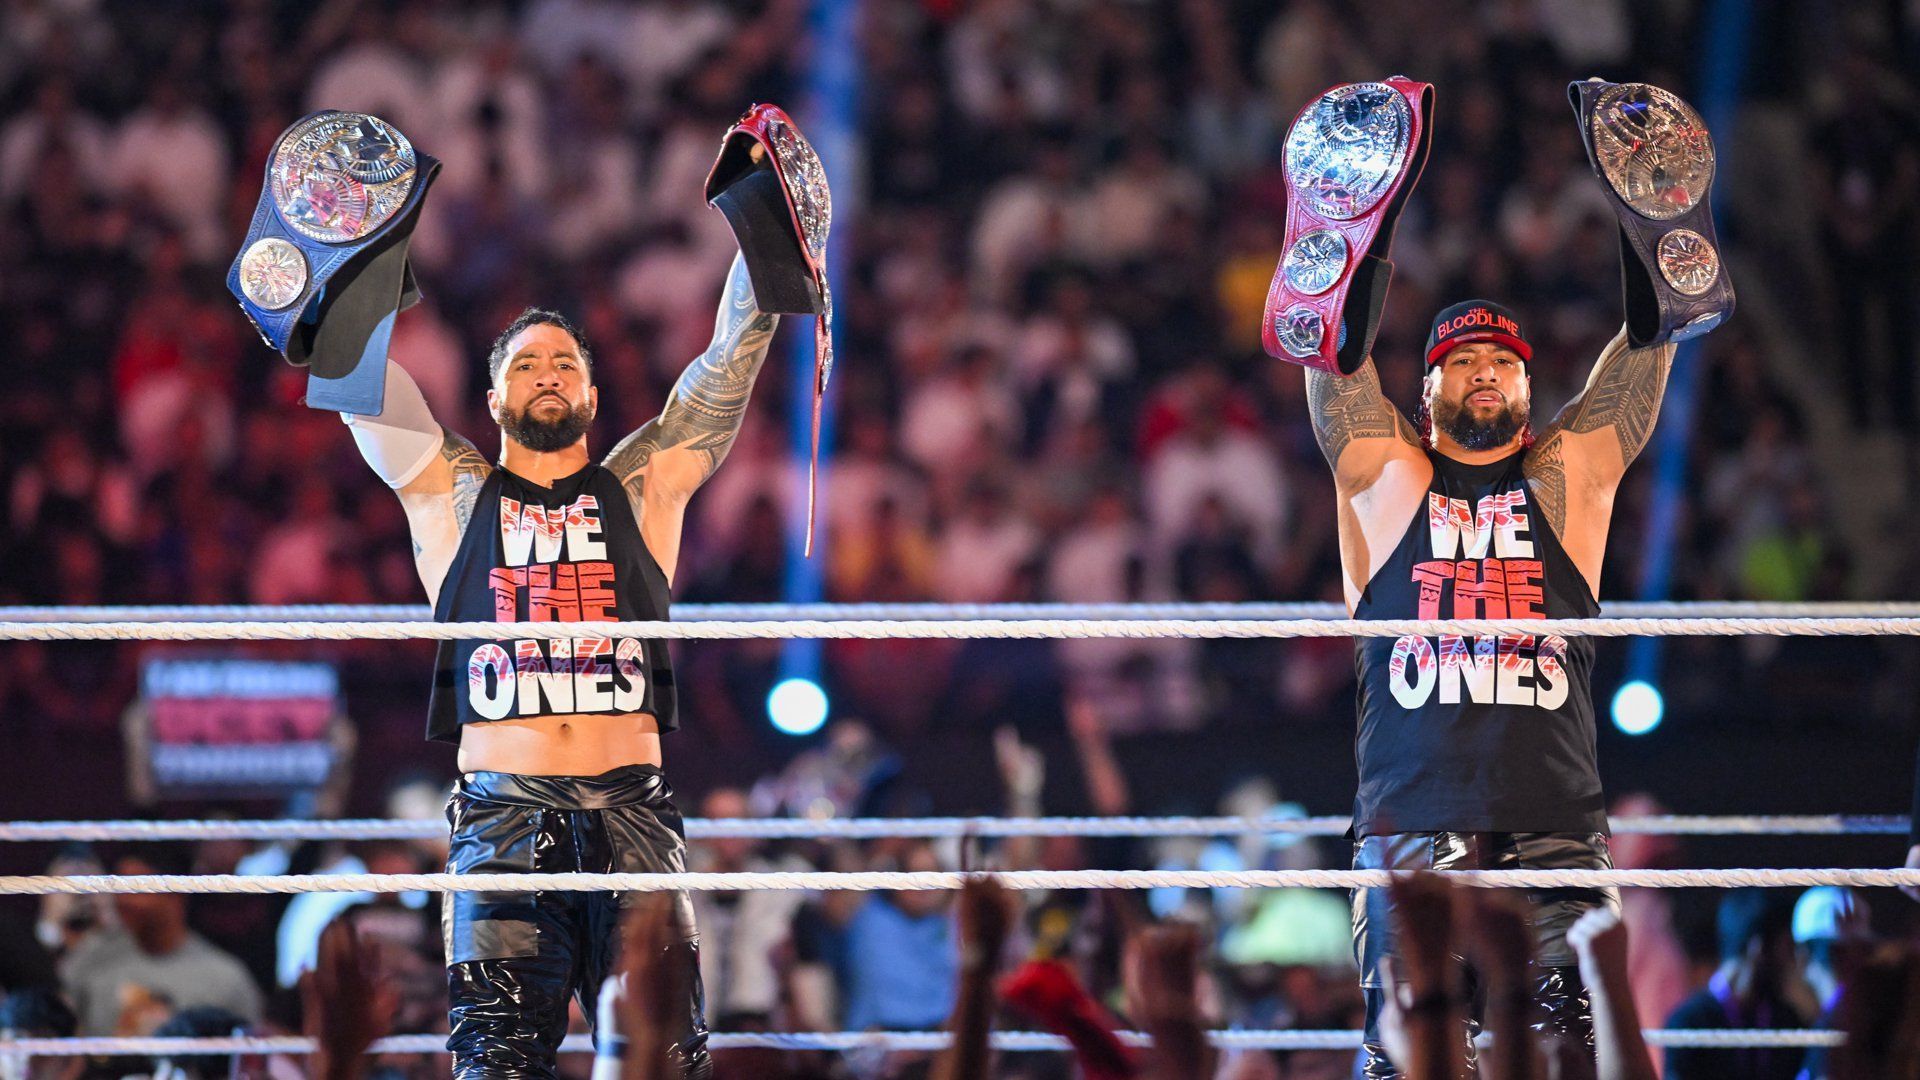 The Usos are the SmackDown Tag Team Champions